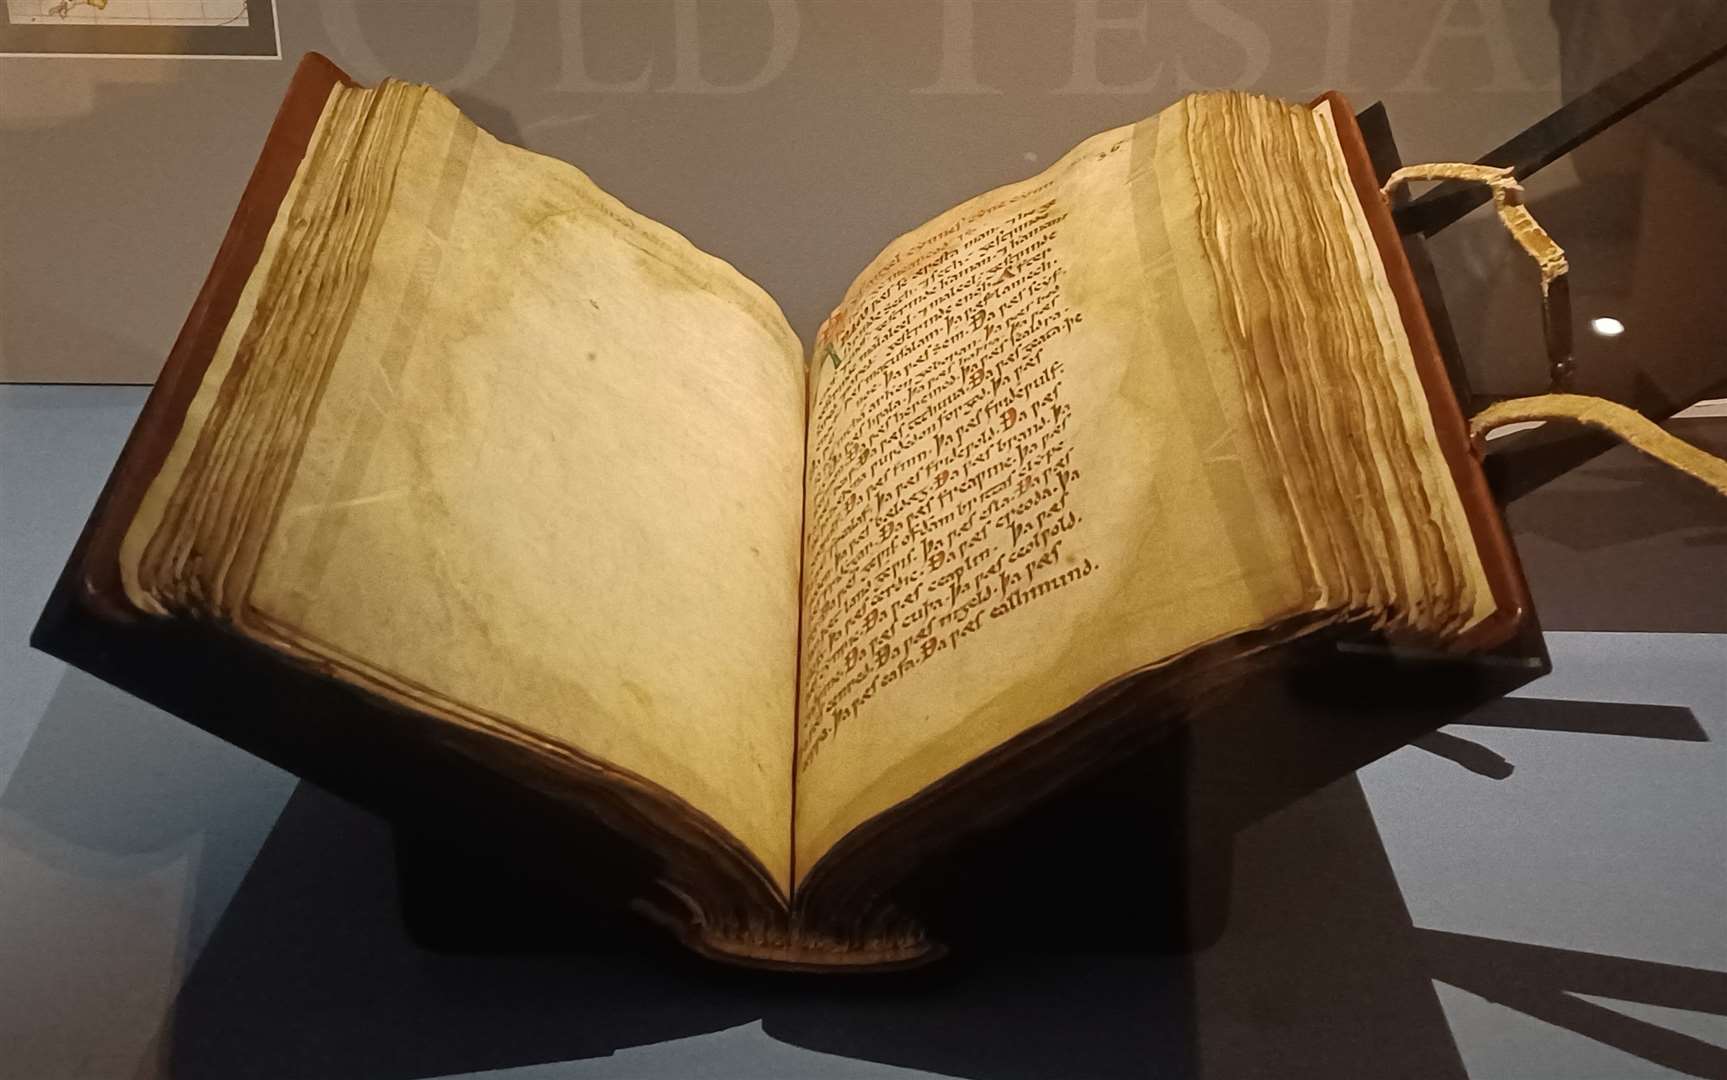 The Textus Roffensis is on display in the Crypt